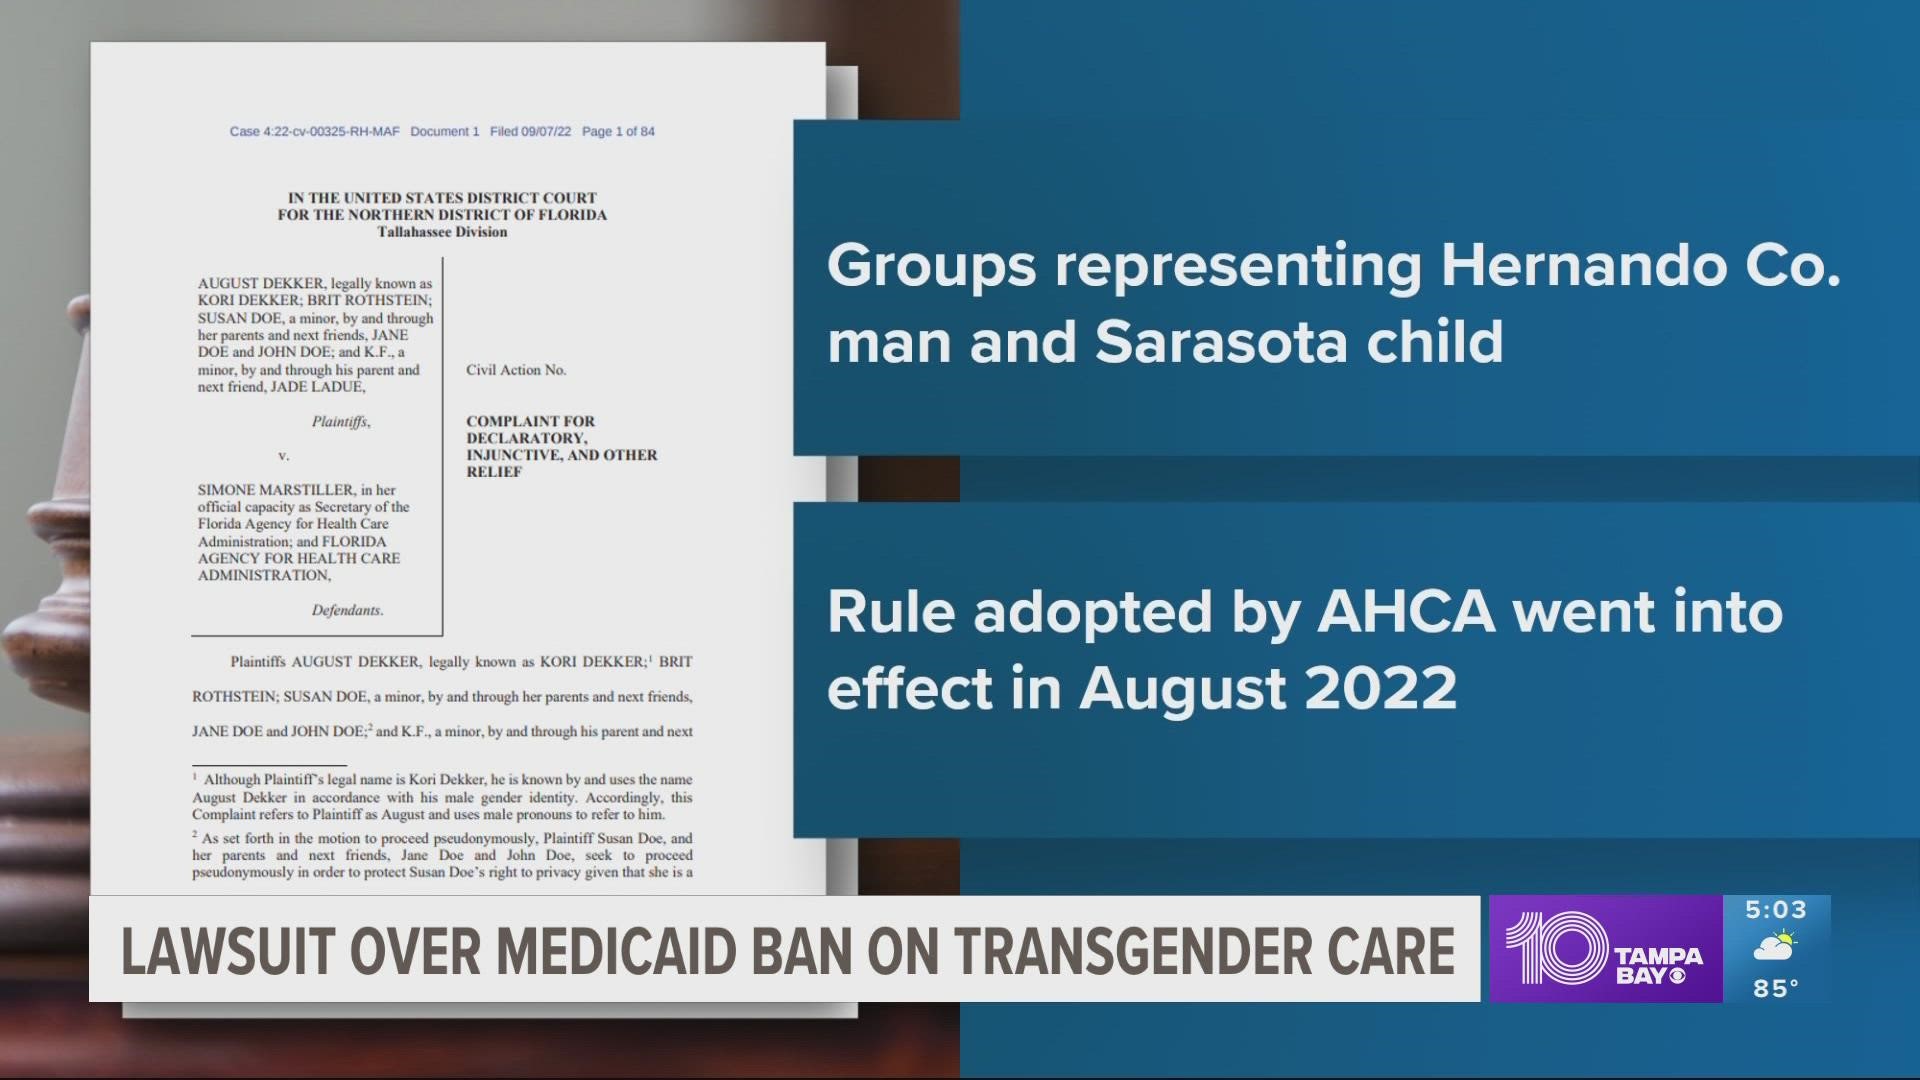 The Florida Agency for Health Care Administration previously released a report stating that puberty blockers and sex reassignment surgery have not been proven safe.